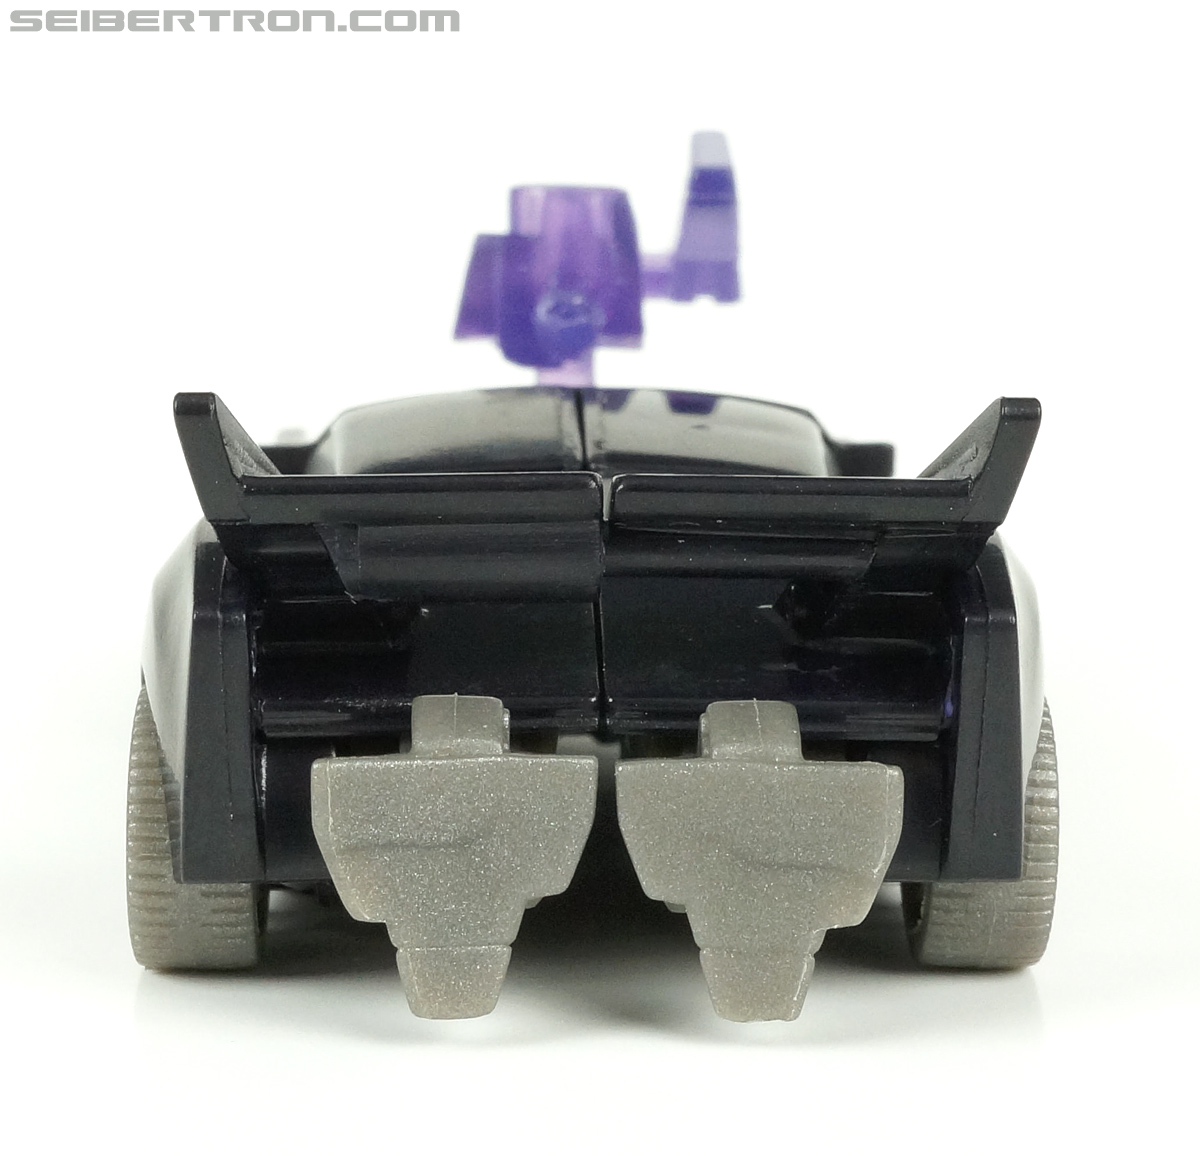 Transformers Prime: Cyberverse Vehicon (Image #22 of 128)